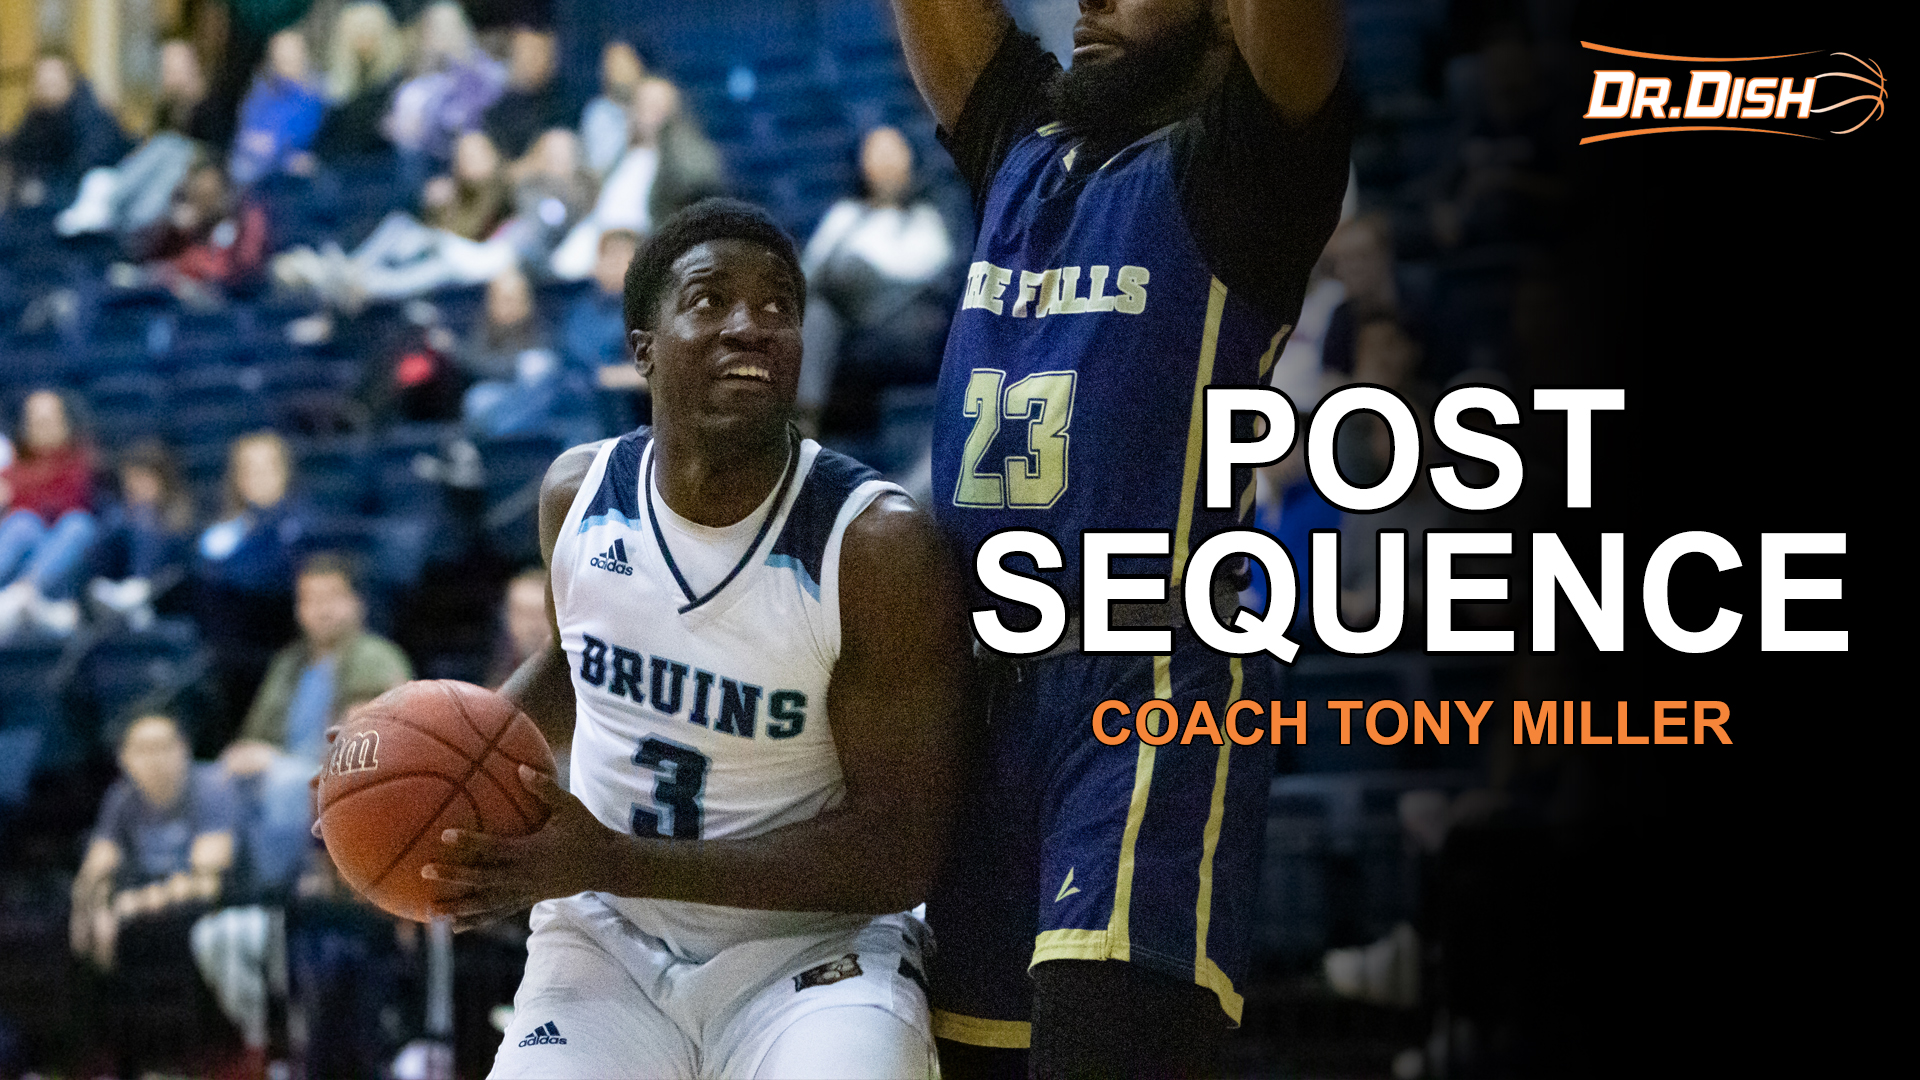 Basketball Drills: Post Sequence Drill with Coach Tony Miller